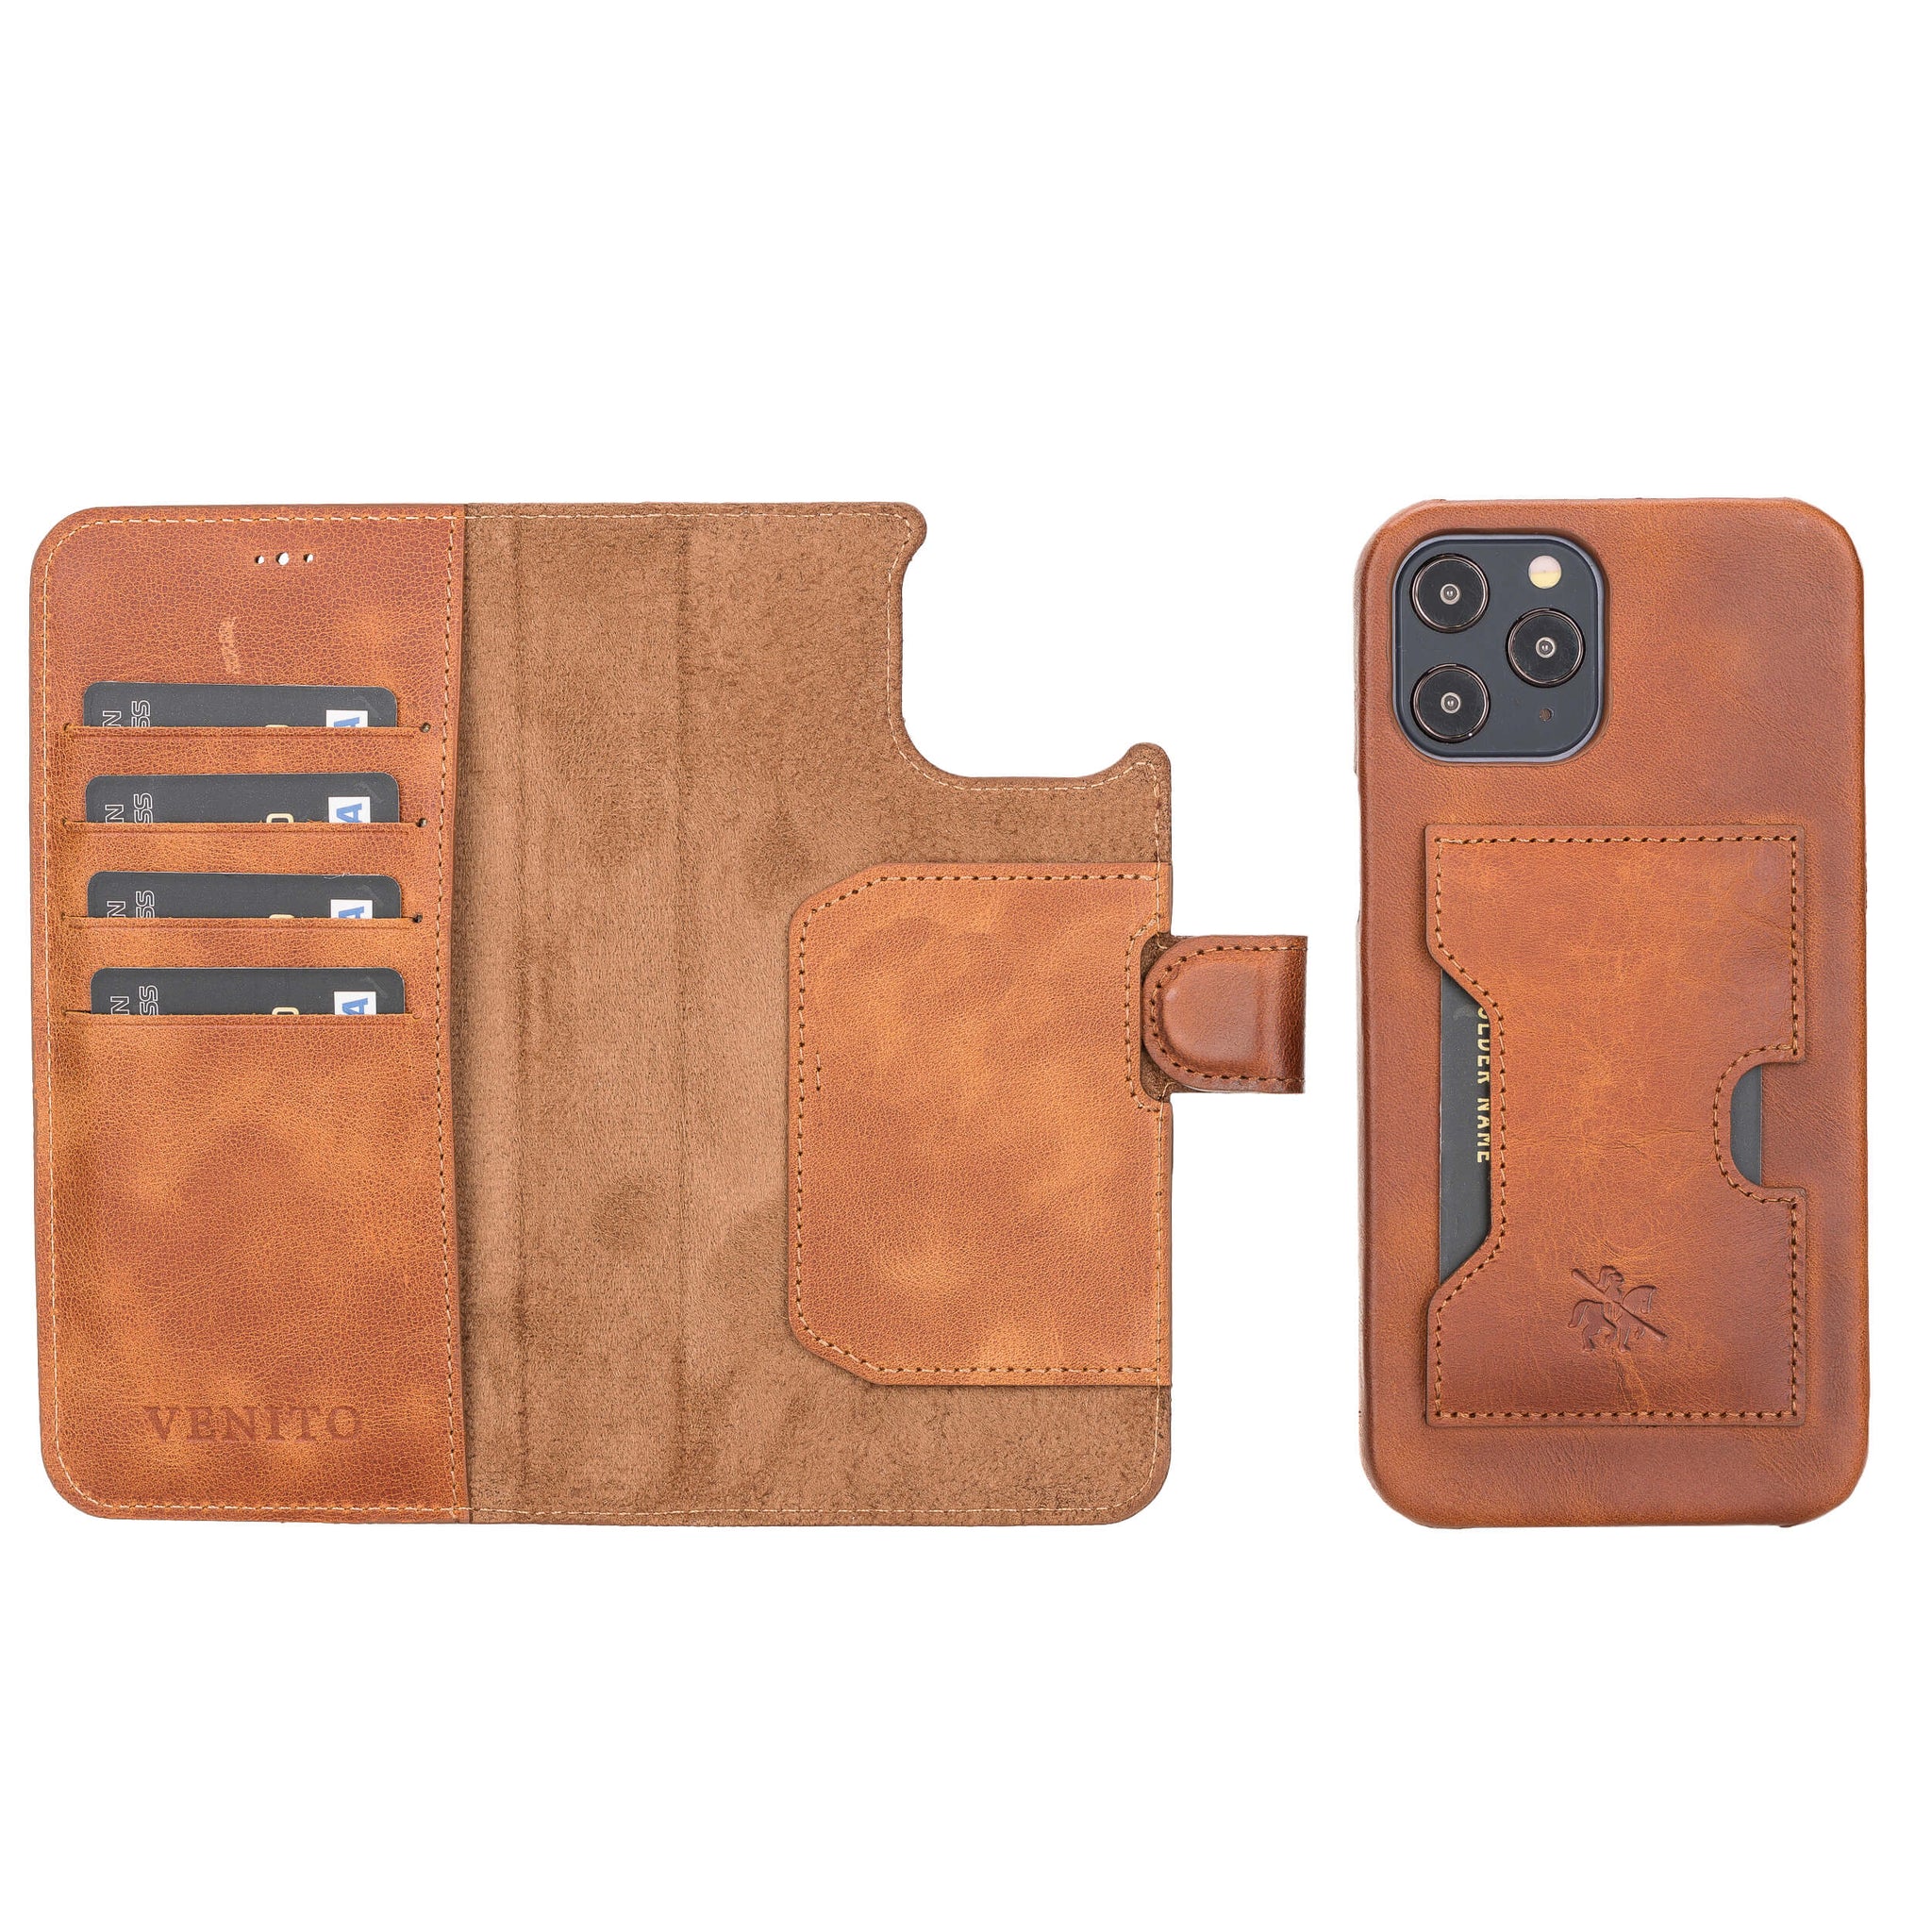 Florence Rfid Blocking Leather Wallet Case For Iphone 12 Pro Max Buy Now Venito Leather